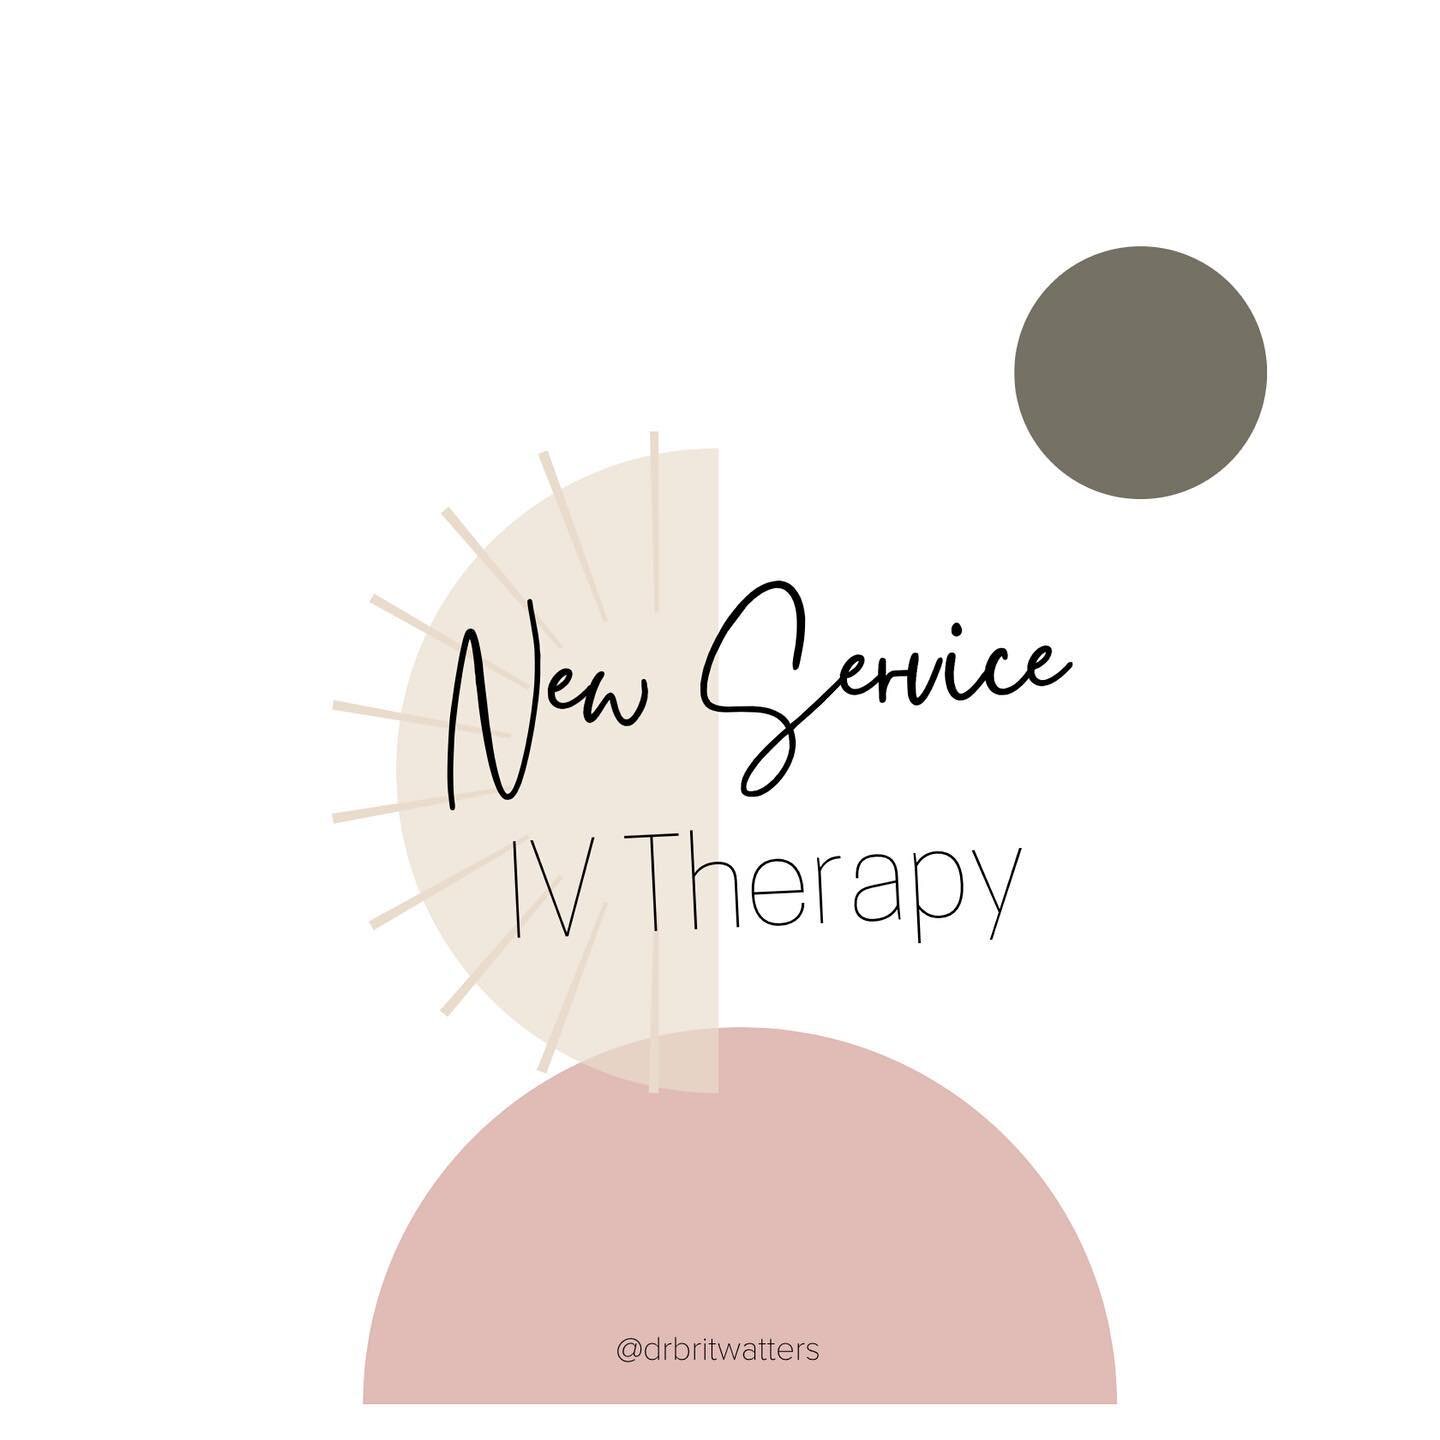 ≪IV THERAPY≫ woohoo! The time has come! IV therapy is now available at Brix Wellness Kelowna. 

IV therapy is a method of administering vitamins, minerals, and nutrients directly into the blood stream to facilitate healing of the body via proper nutr